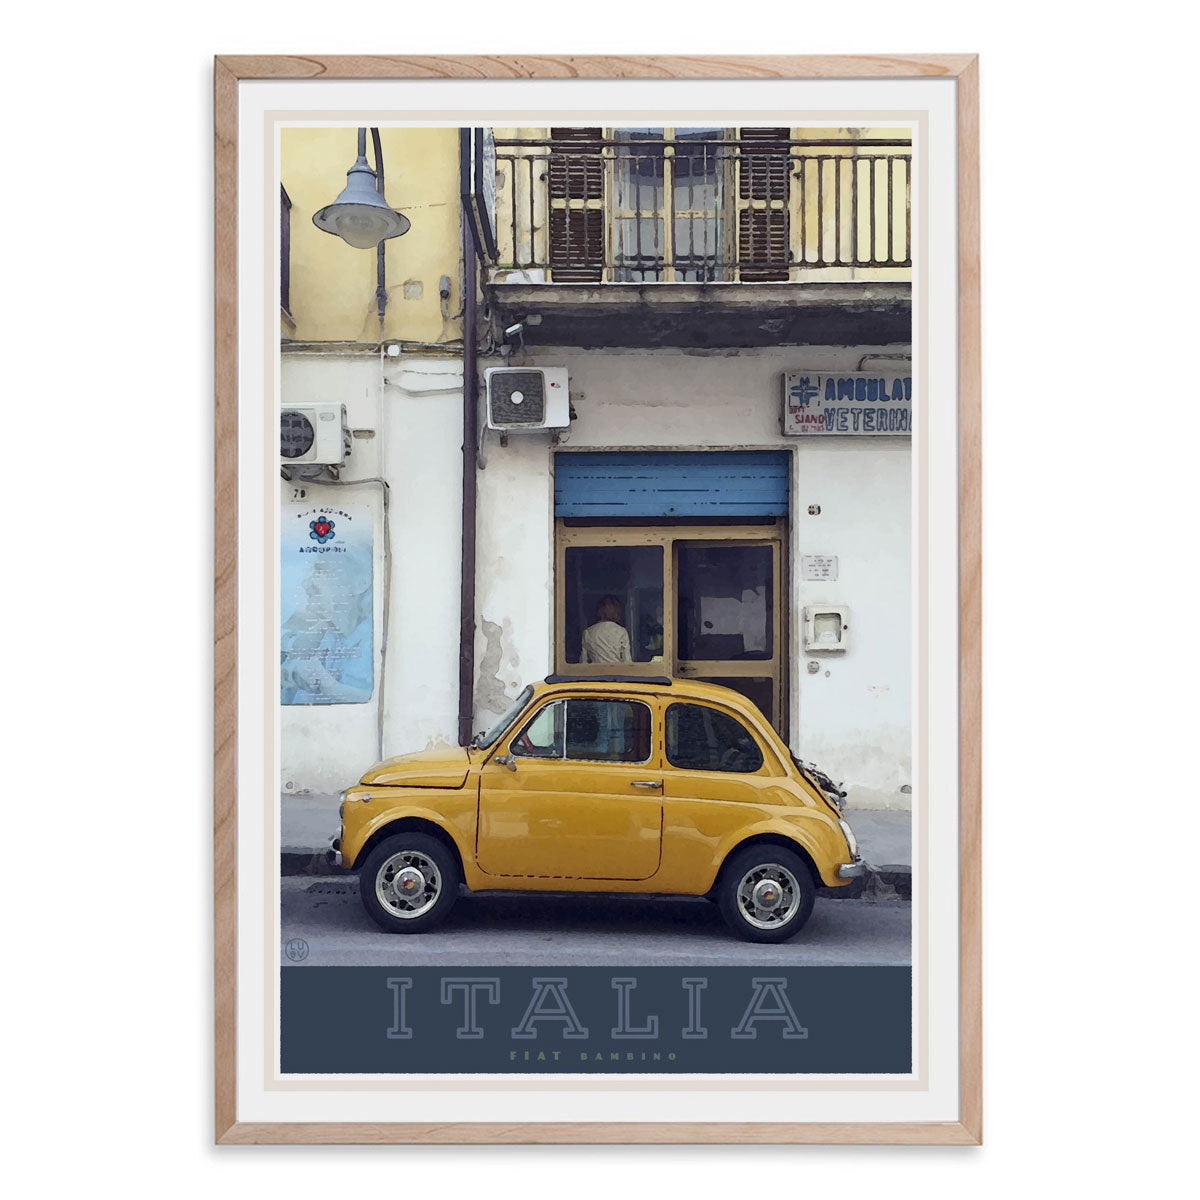 Italian bambino travel style oak framed poster - places we luv